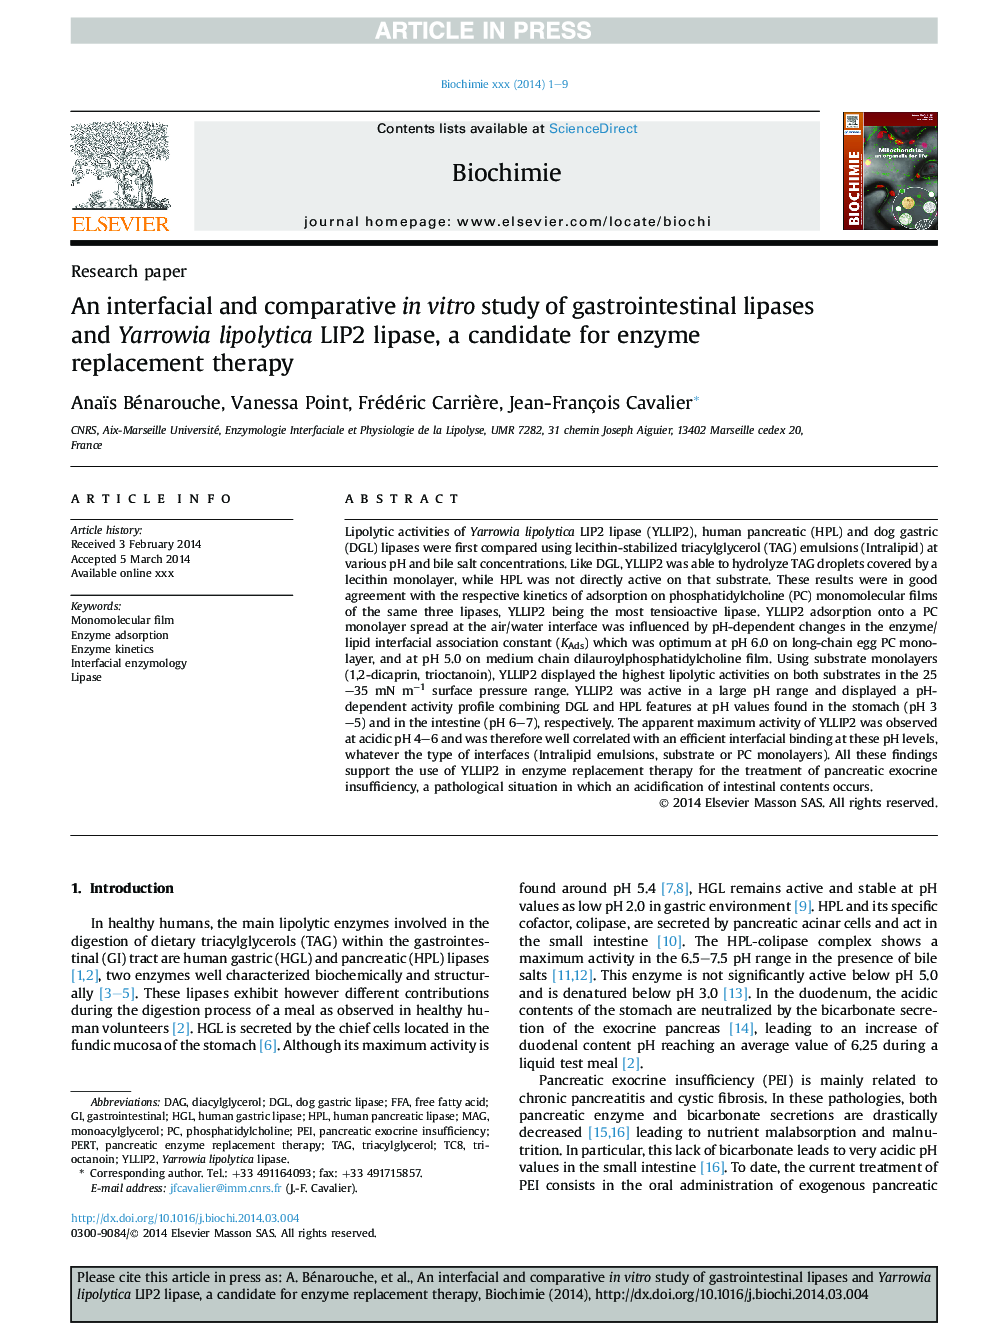 An interfacial and comparative inÂ vitro study of gastrointestinal lipases and Yarrowia lipolytica LIP2 lipase, a candidate for enzyme replacement therapy